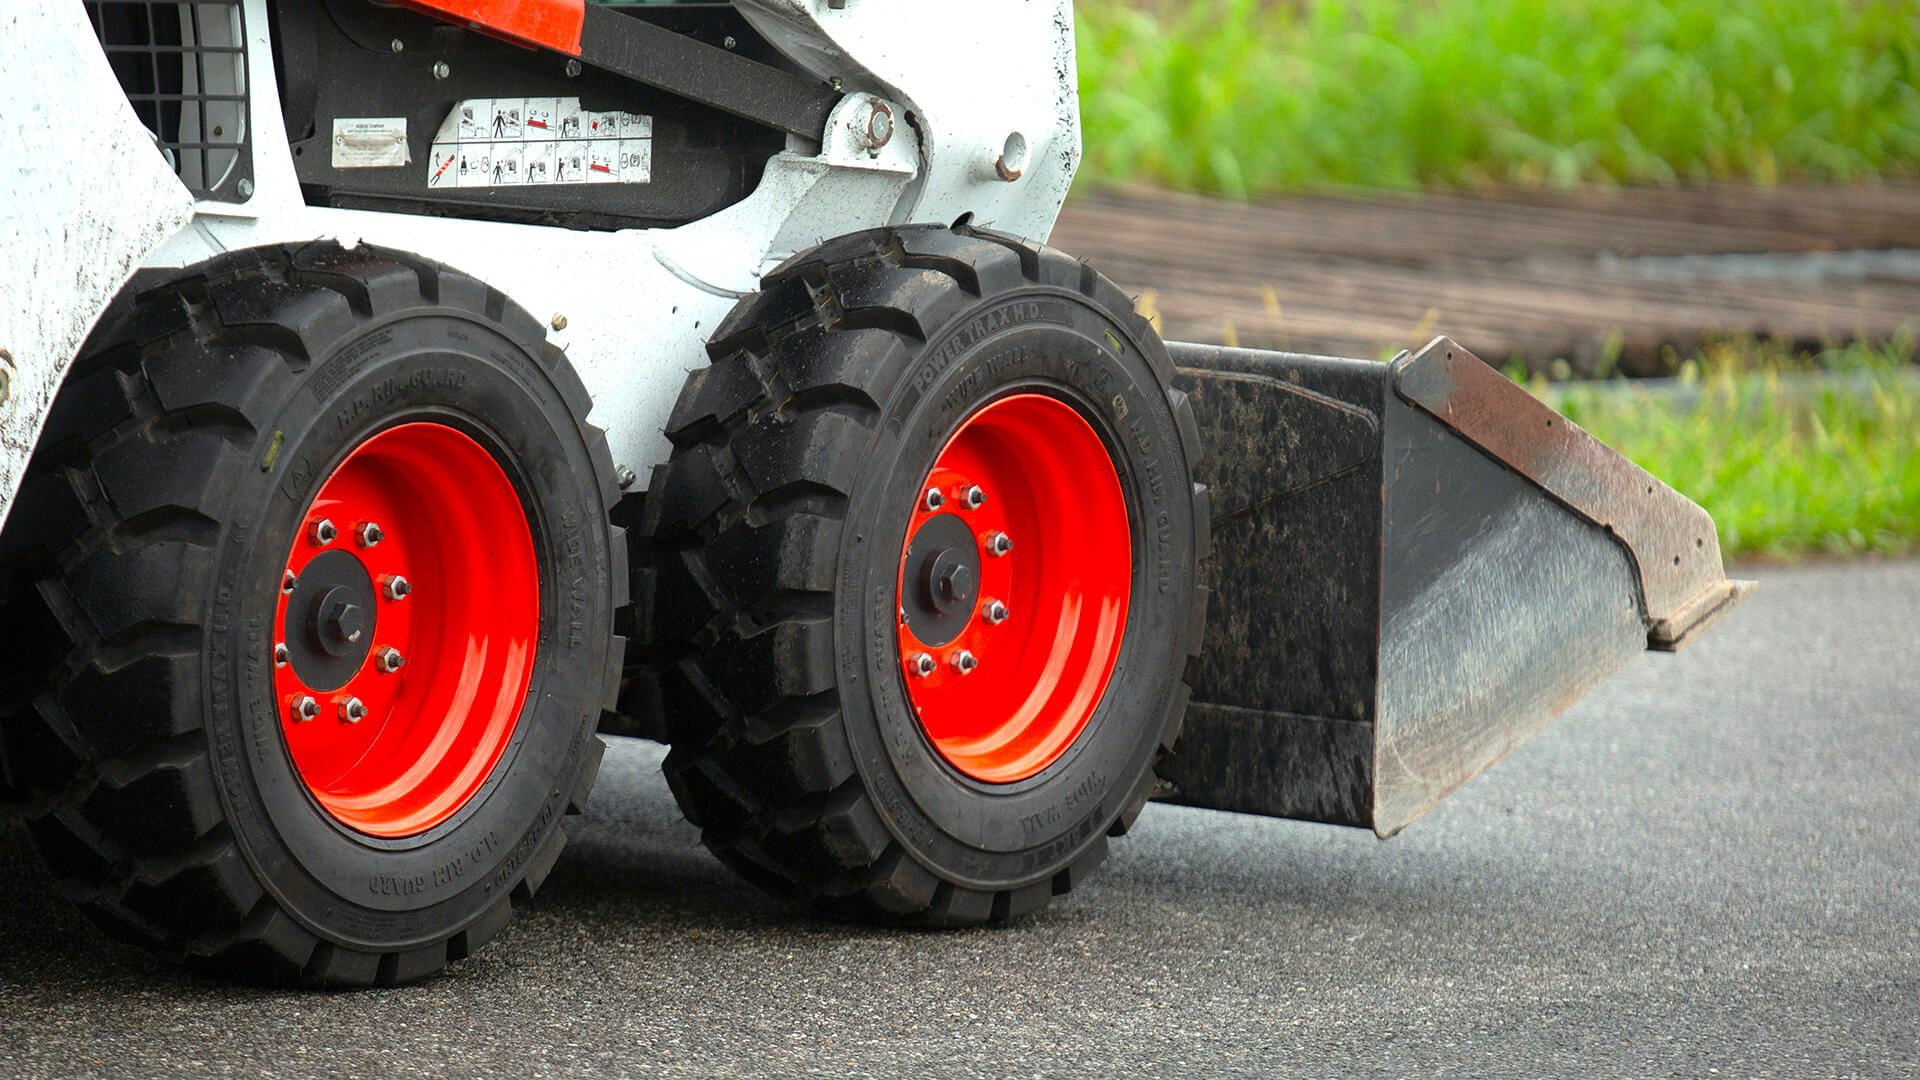 Skid steer tires: purchasing and maintenance tips